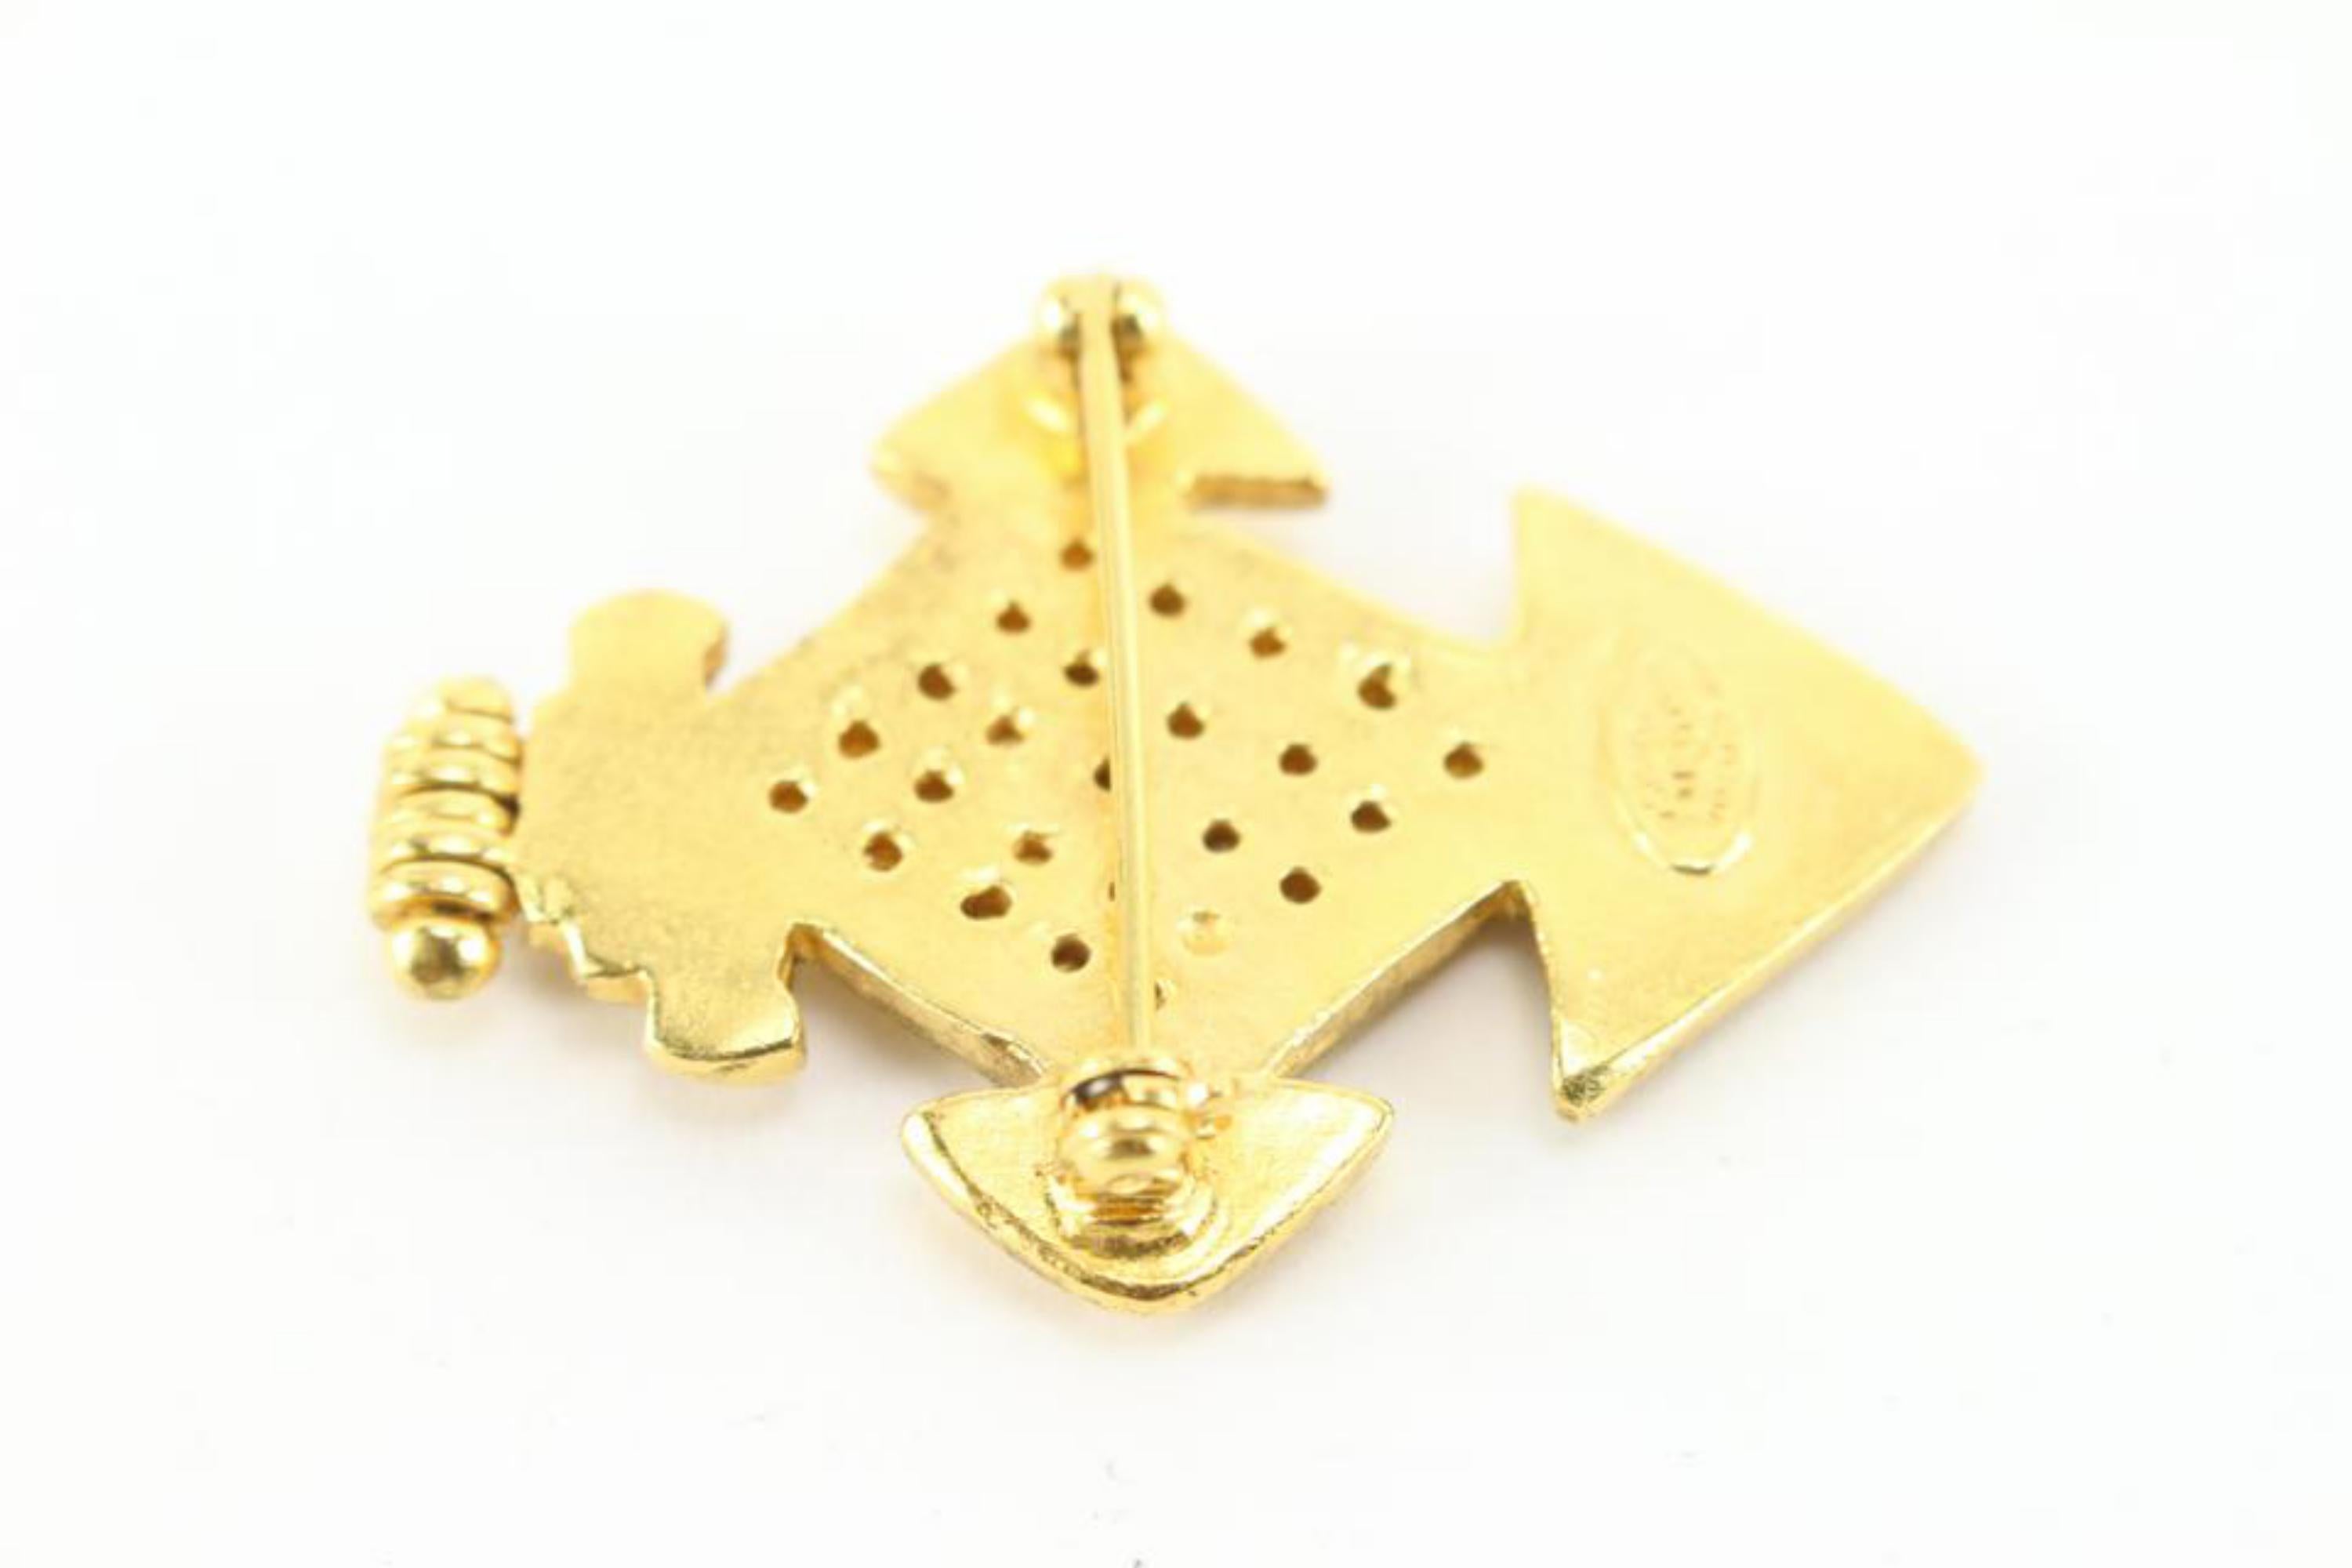 Chanel 94p 24k Gold Plated  CC Cross Brooch Pin 39cc722s